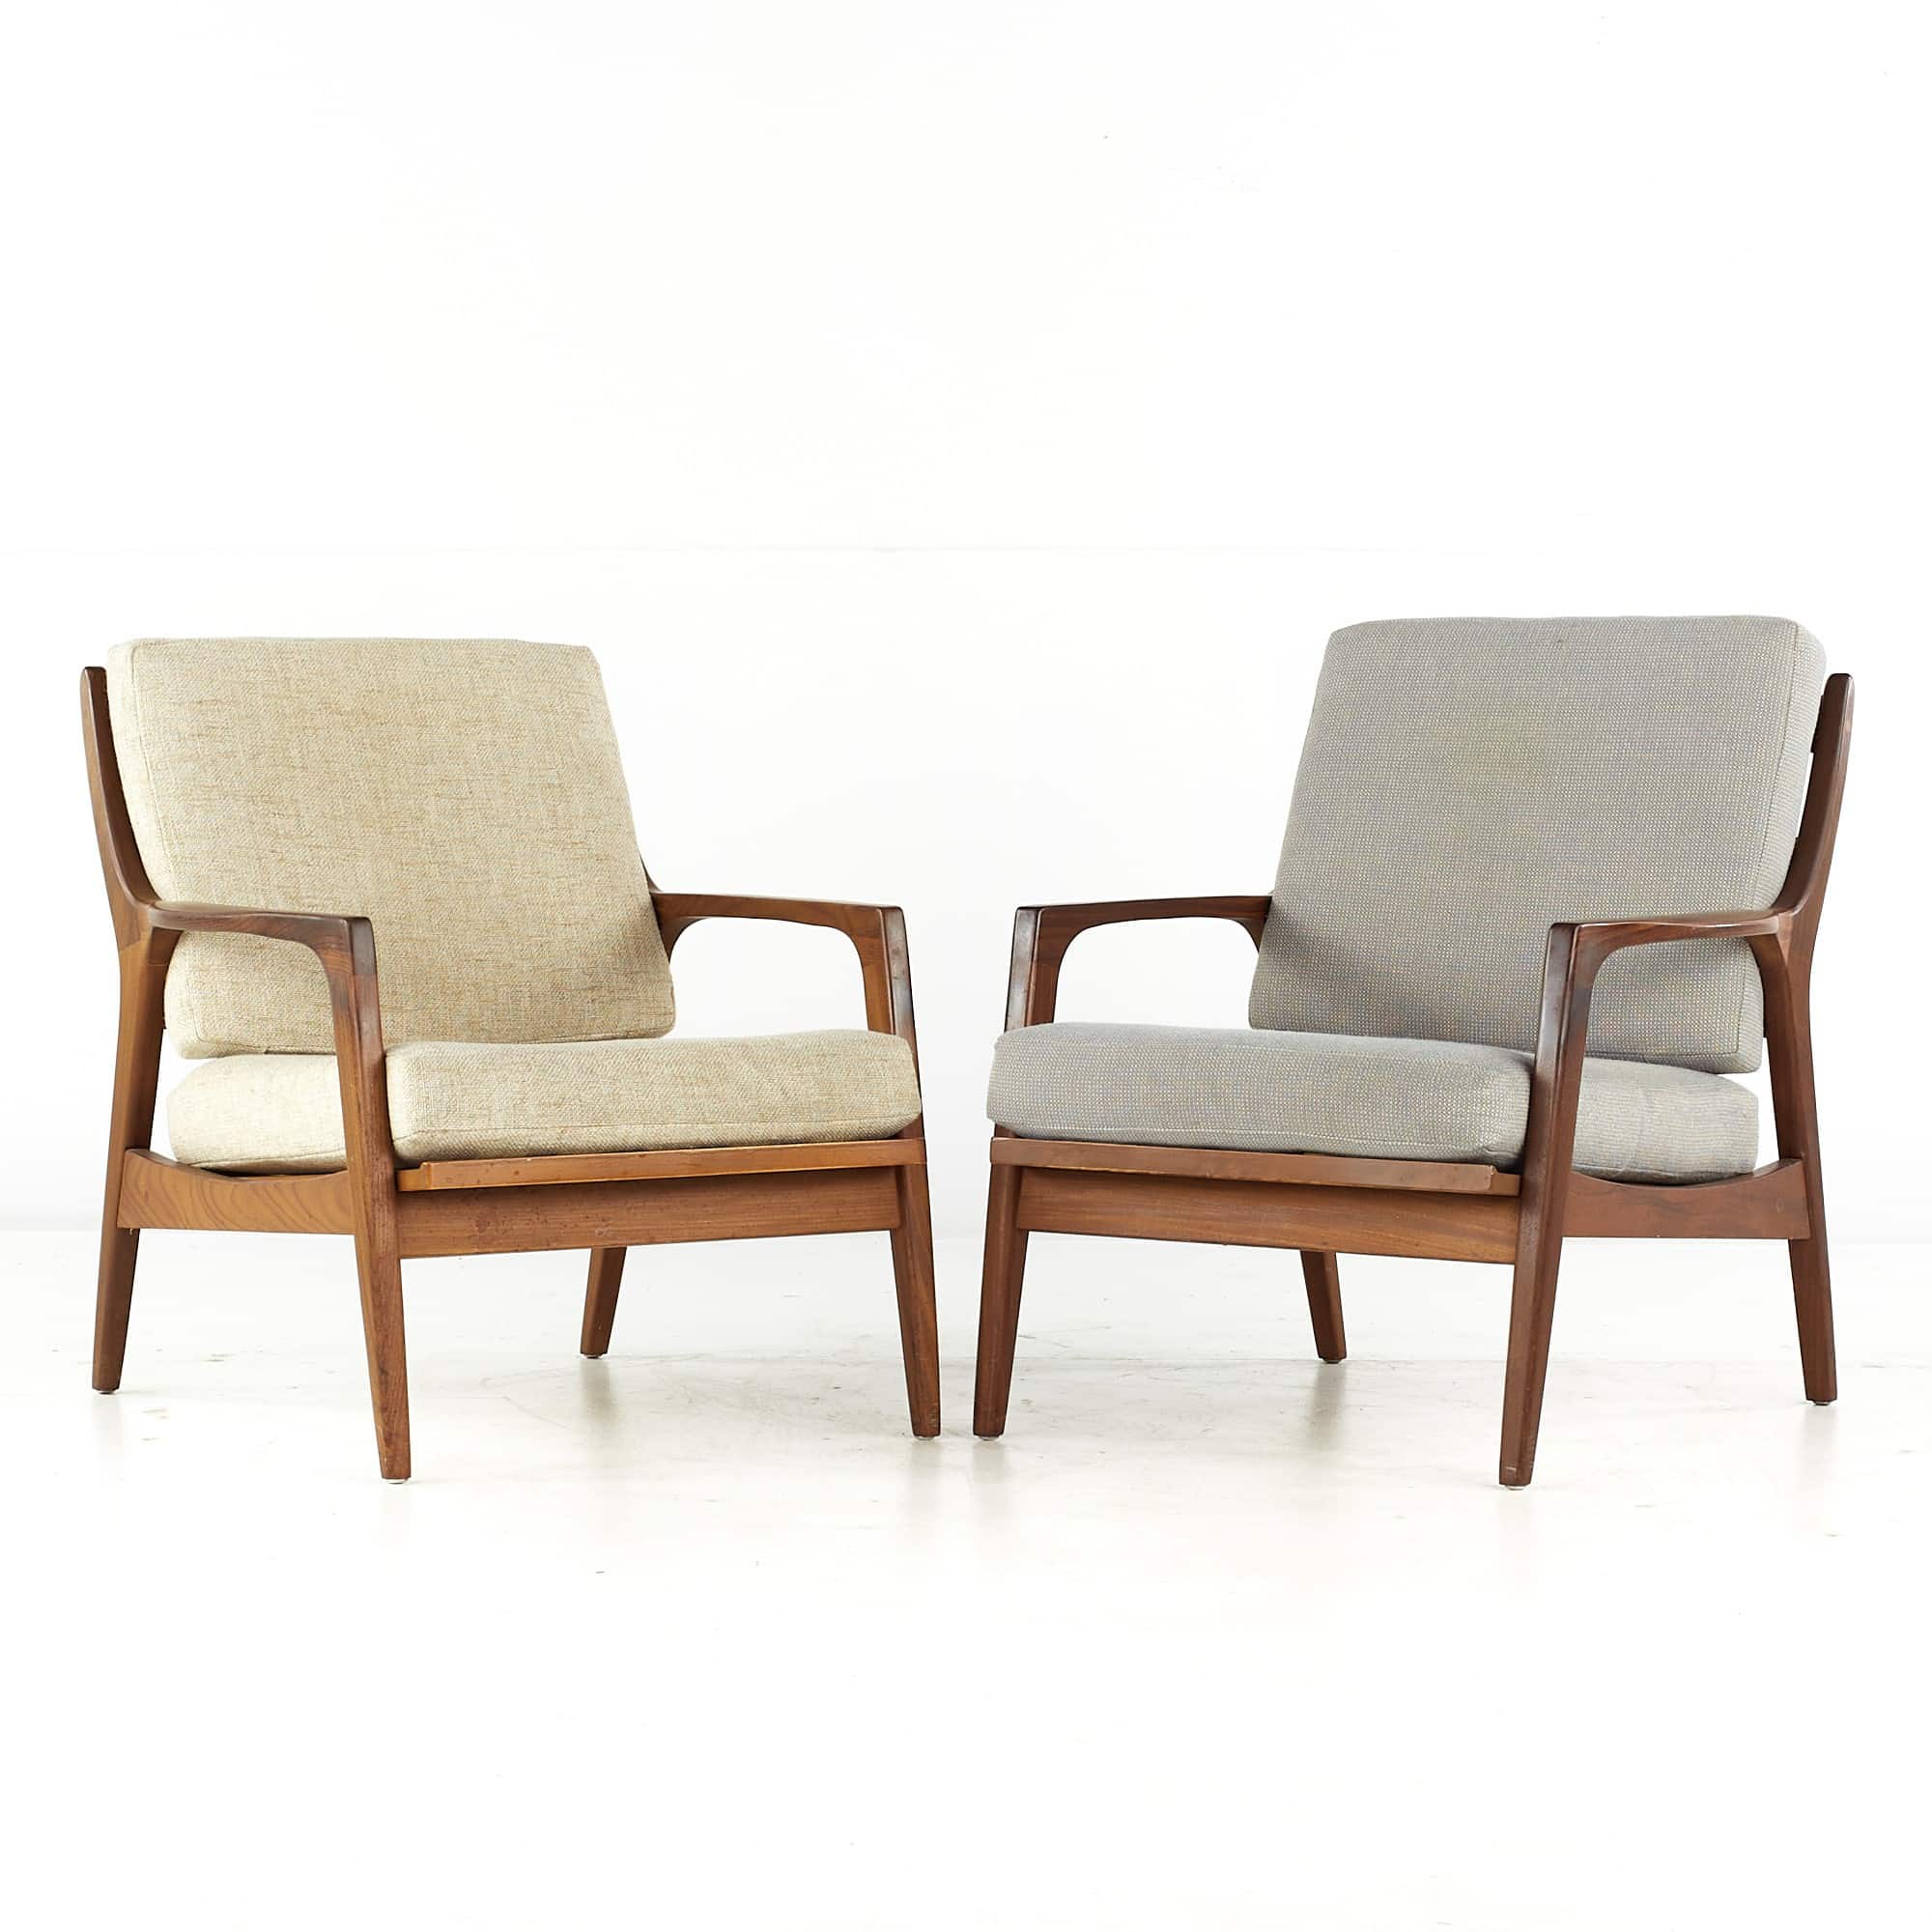 Jan Kuypers for Imperial Mid Century Danish Teak Lounge Chairs - Pair